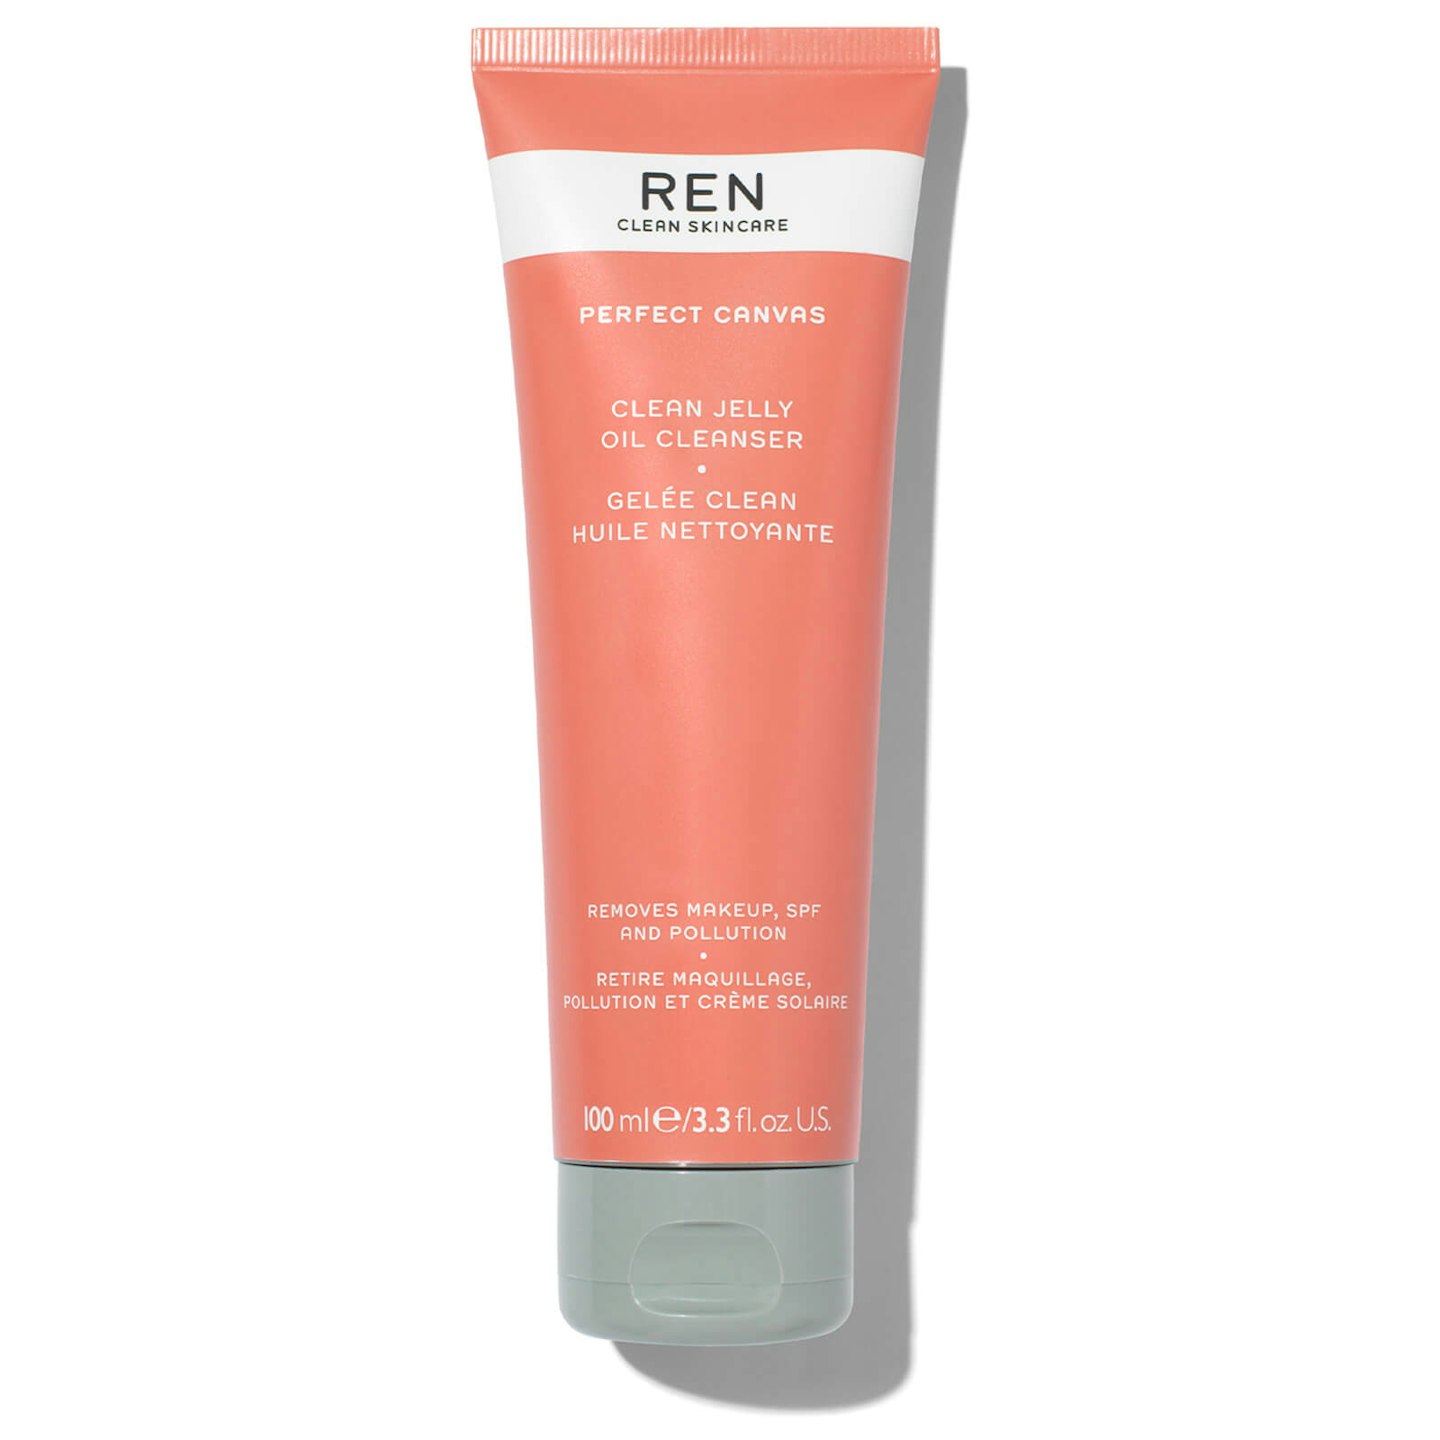 REN Perfect Canvas Clean Jelly Oil Cleanser, £25